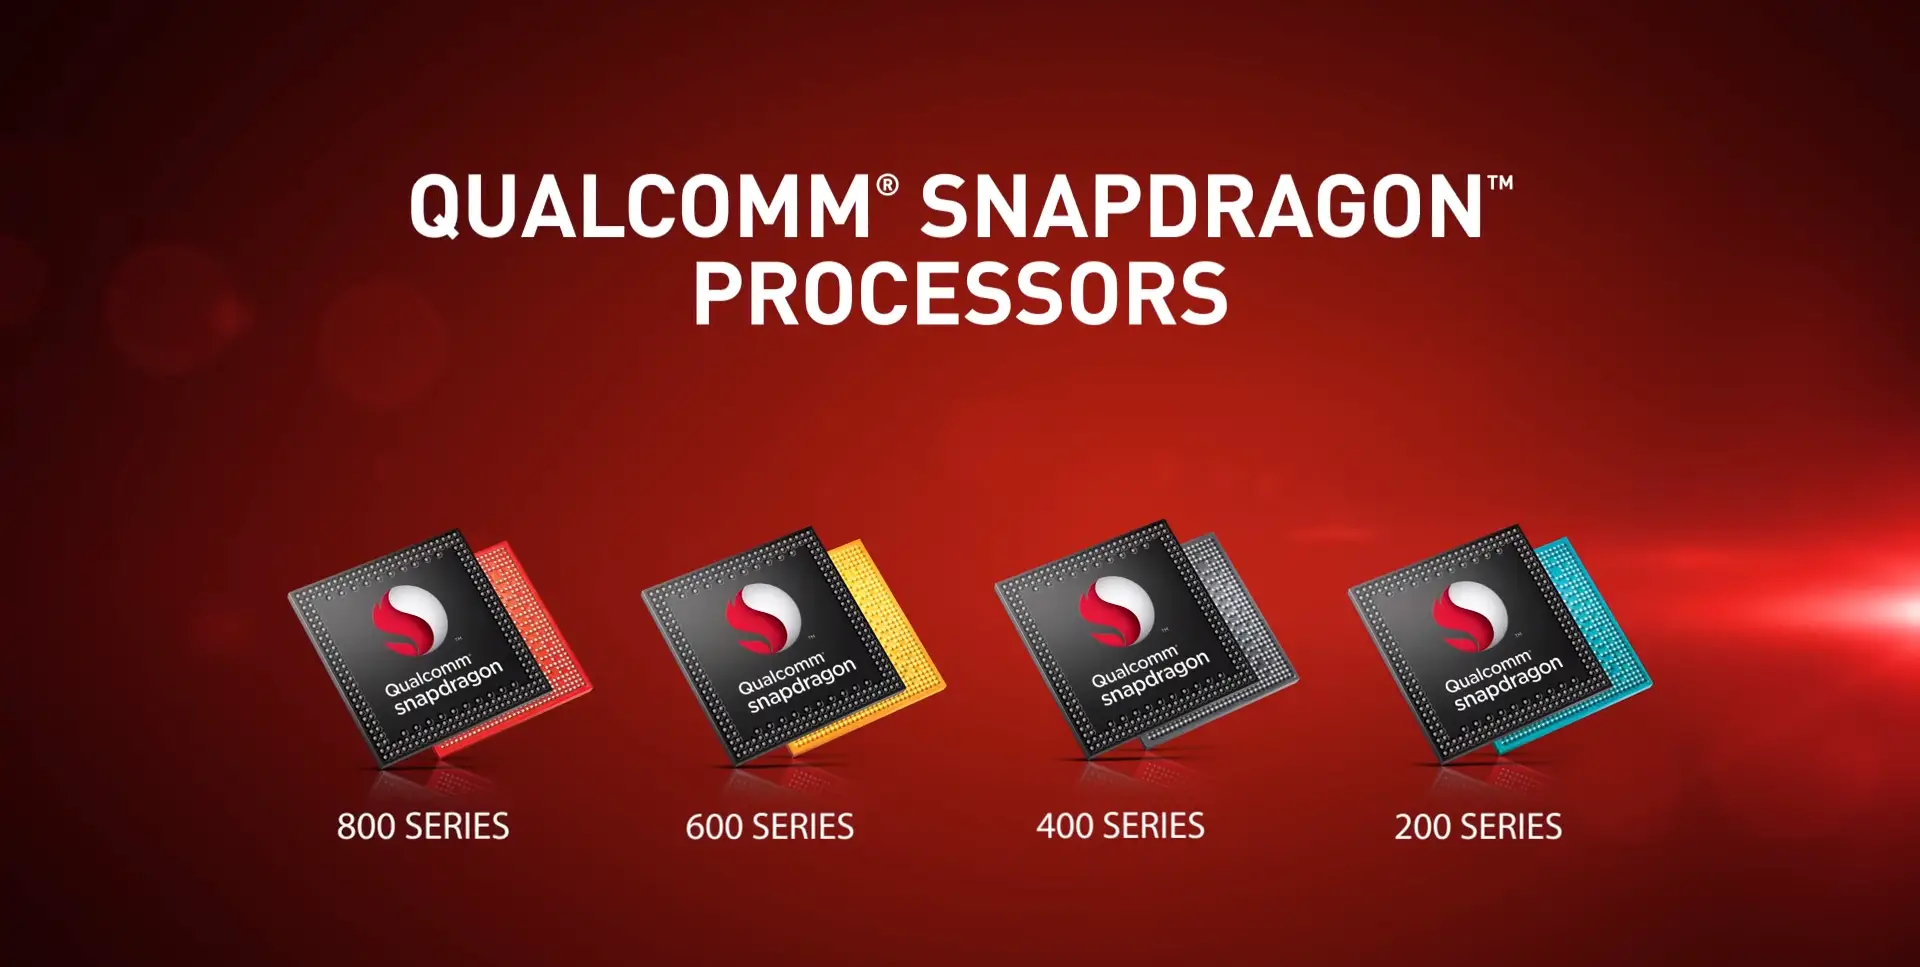 Qualcomm Snapdragon 200,400,600 and 800